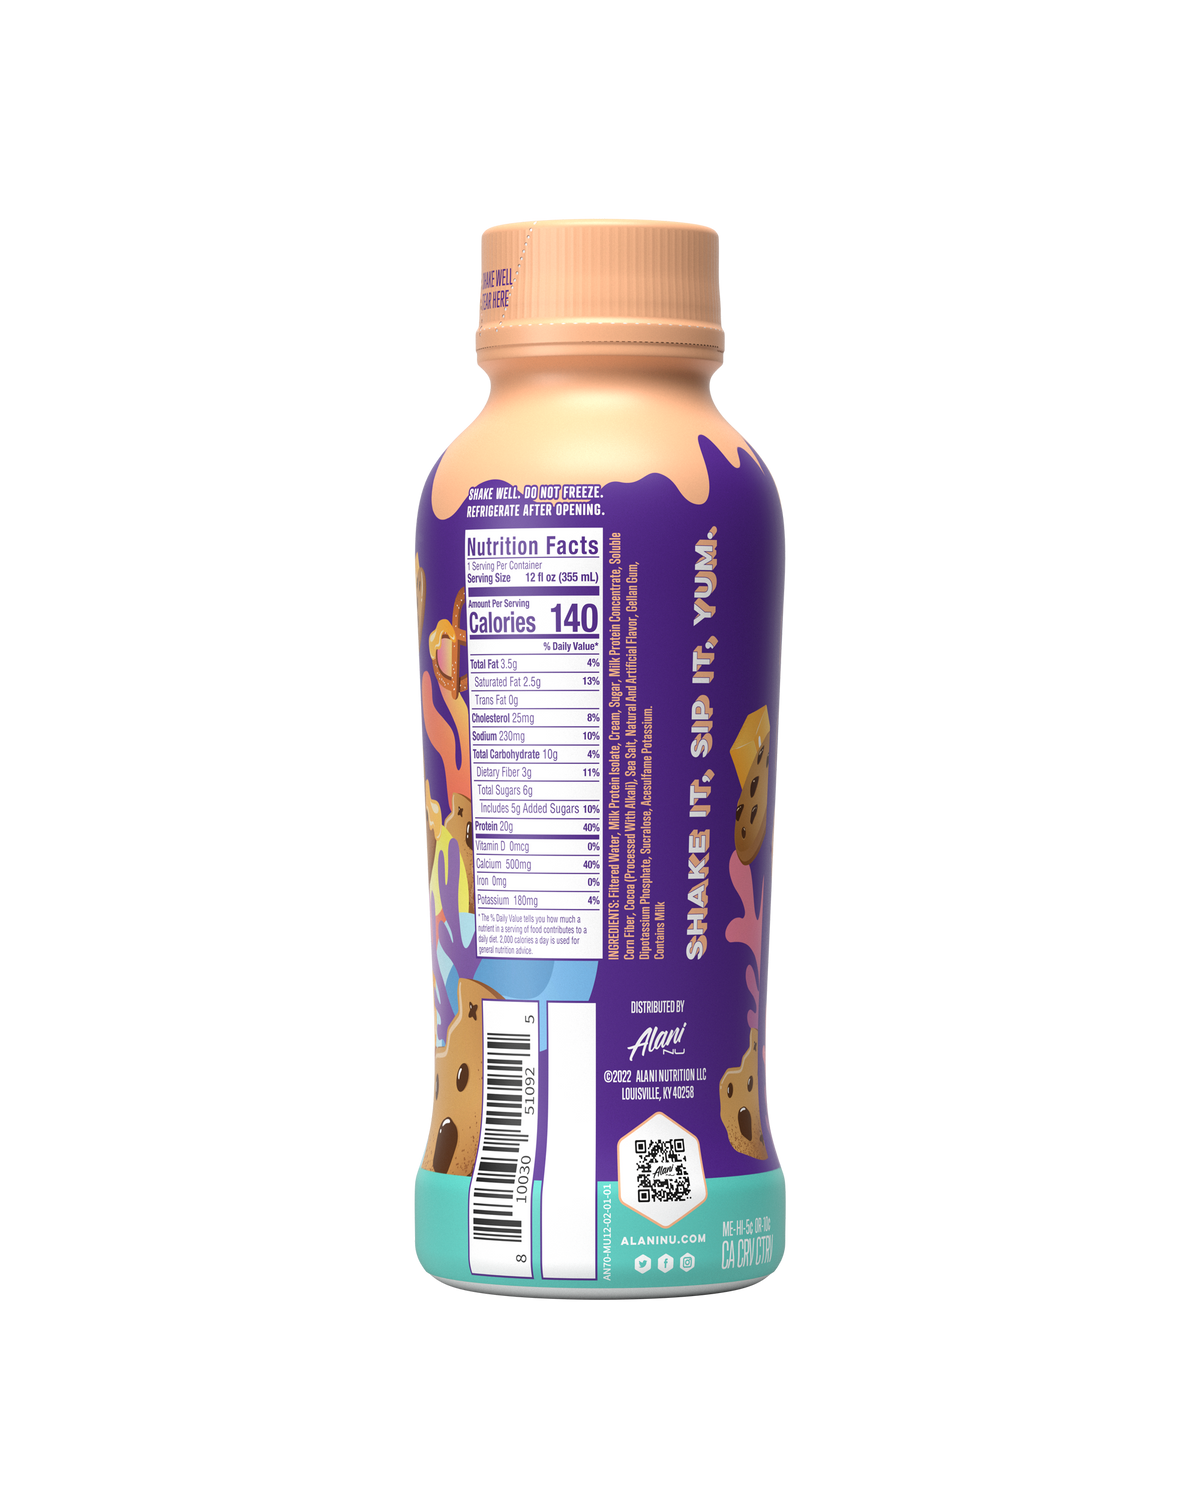 Shakes Products Range – Complete Nutrition